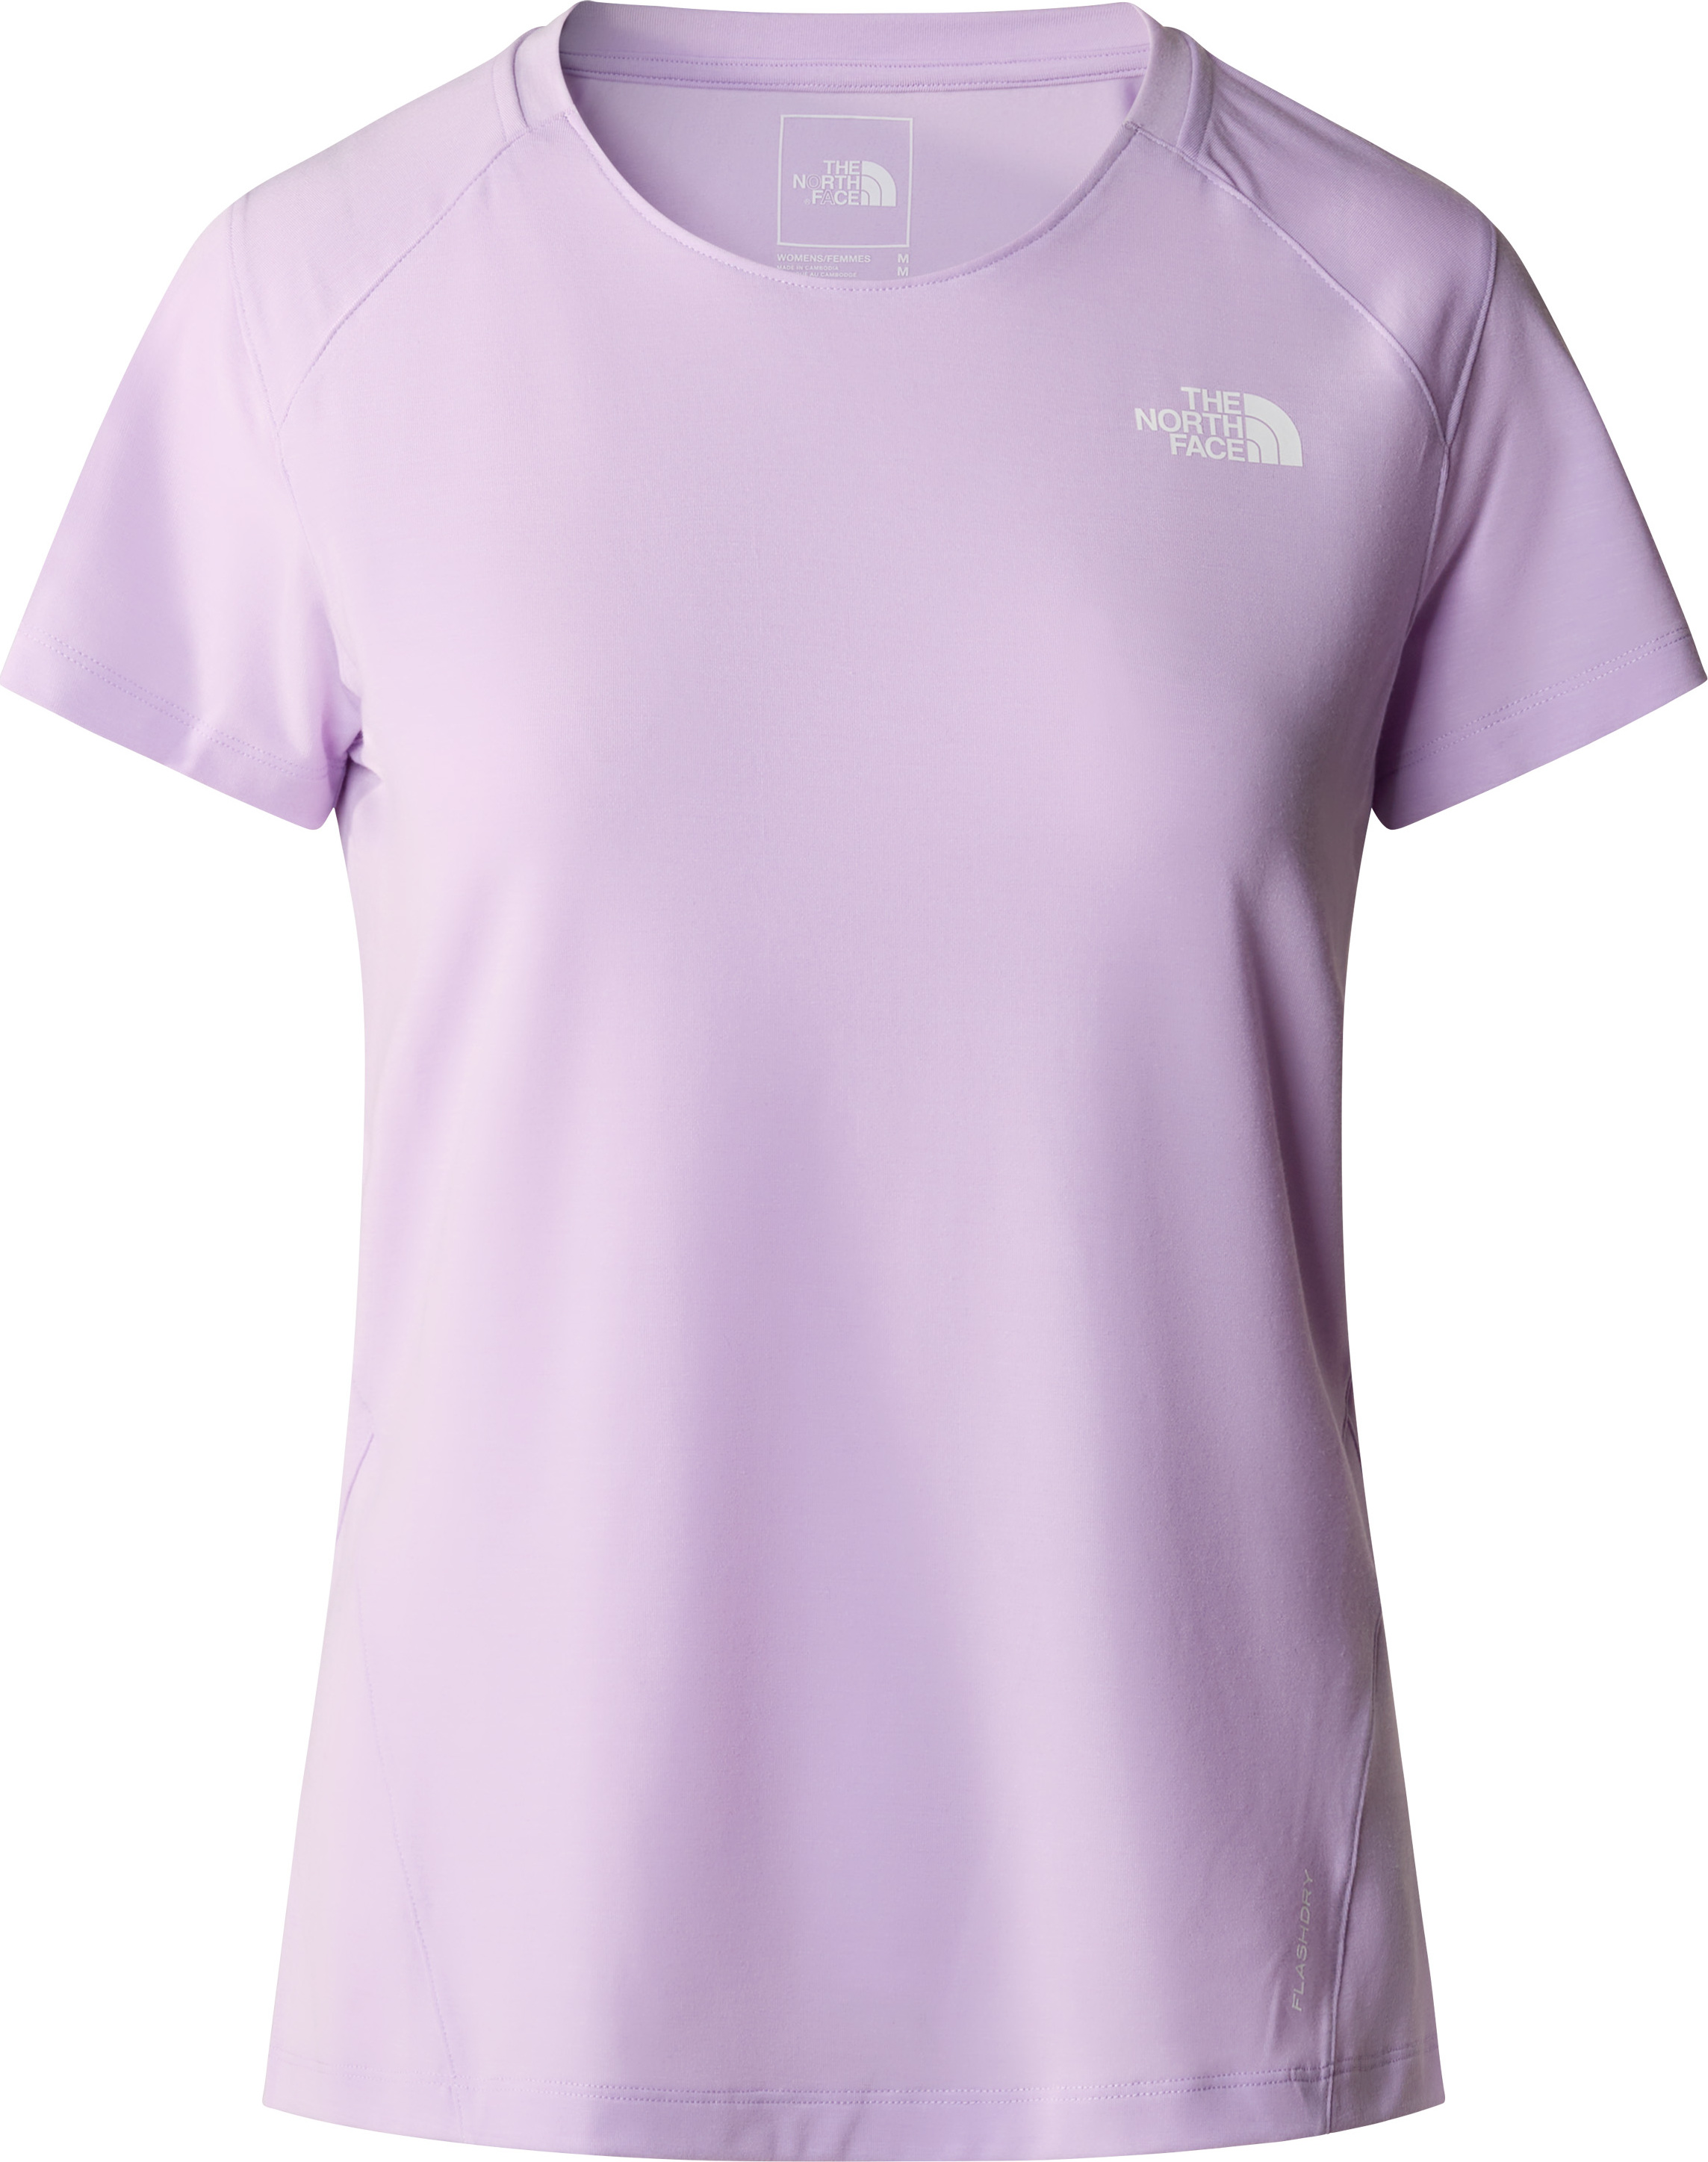 The North Face The North Face Women's Lightning Alpine T-Shirt Lite Lilac L, Lite Lilac